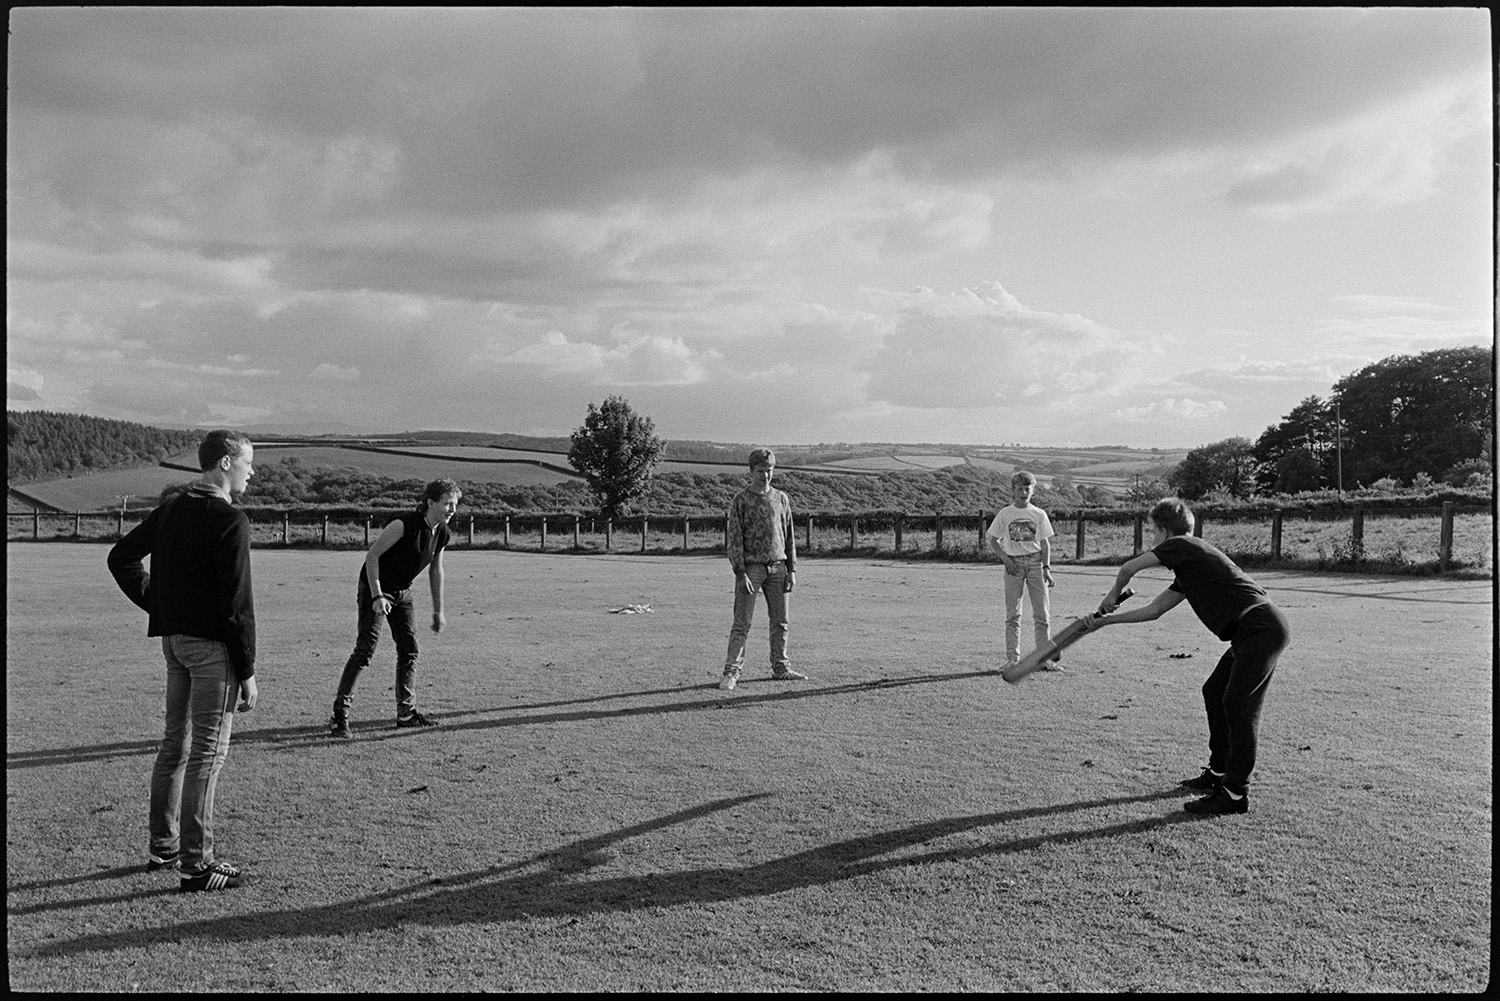 Boys cricket fielding practice on village cricket pitch with sun and clouds.
[Five boys at cricket practice with one of the boys hitting the ball with a bat, on the Chulmleigh village cricket field. A view of the surrounding countryside of fields and hedgerows is visible in the background along with clouds in the sky.]